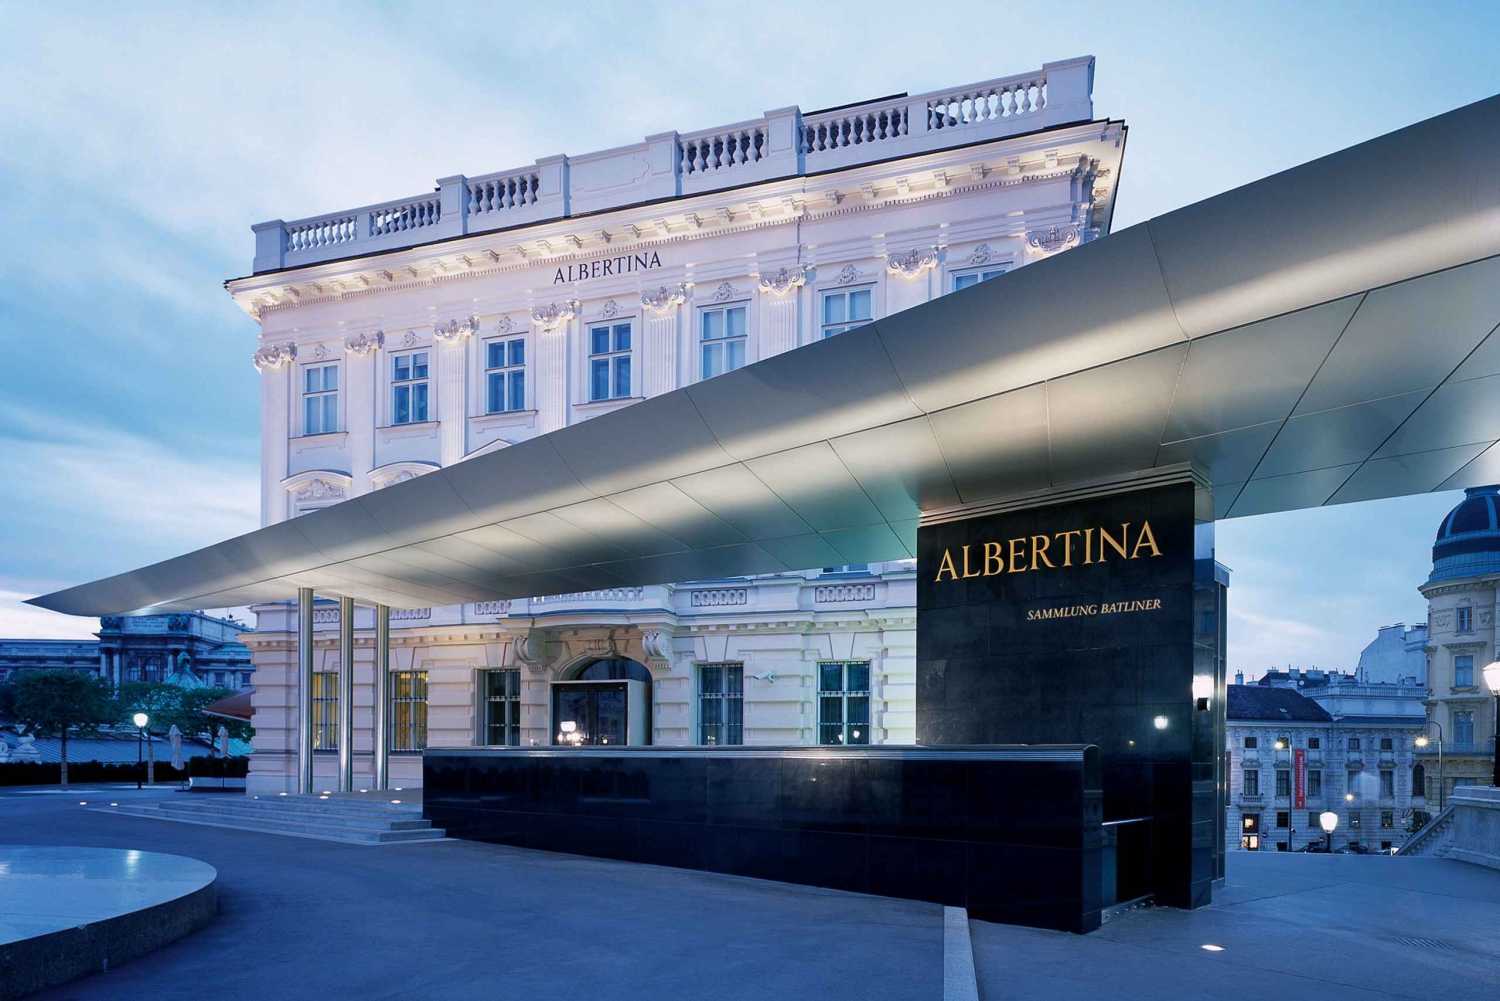 Tickets for the Albertina Exhibitions and Staterooms